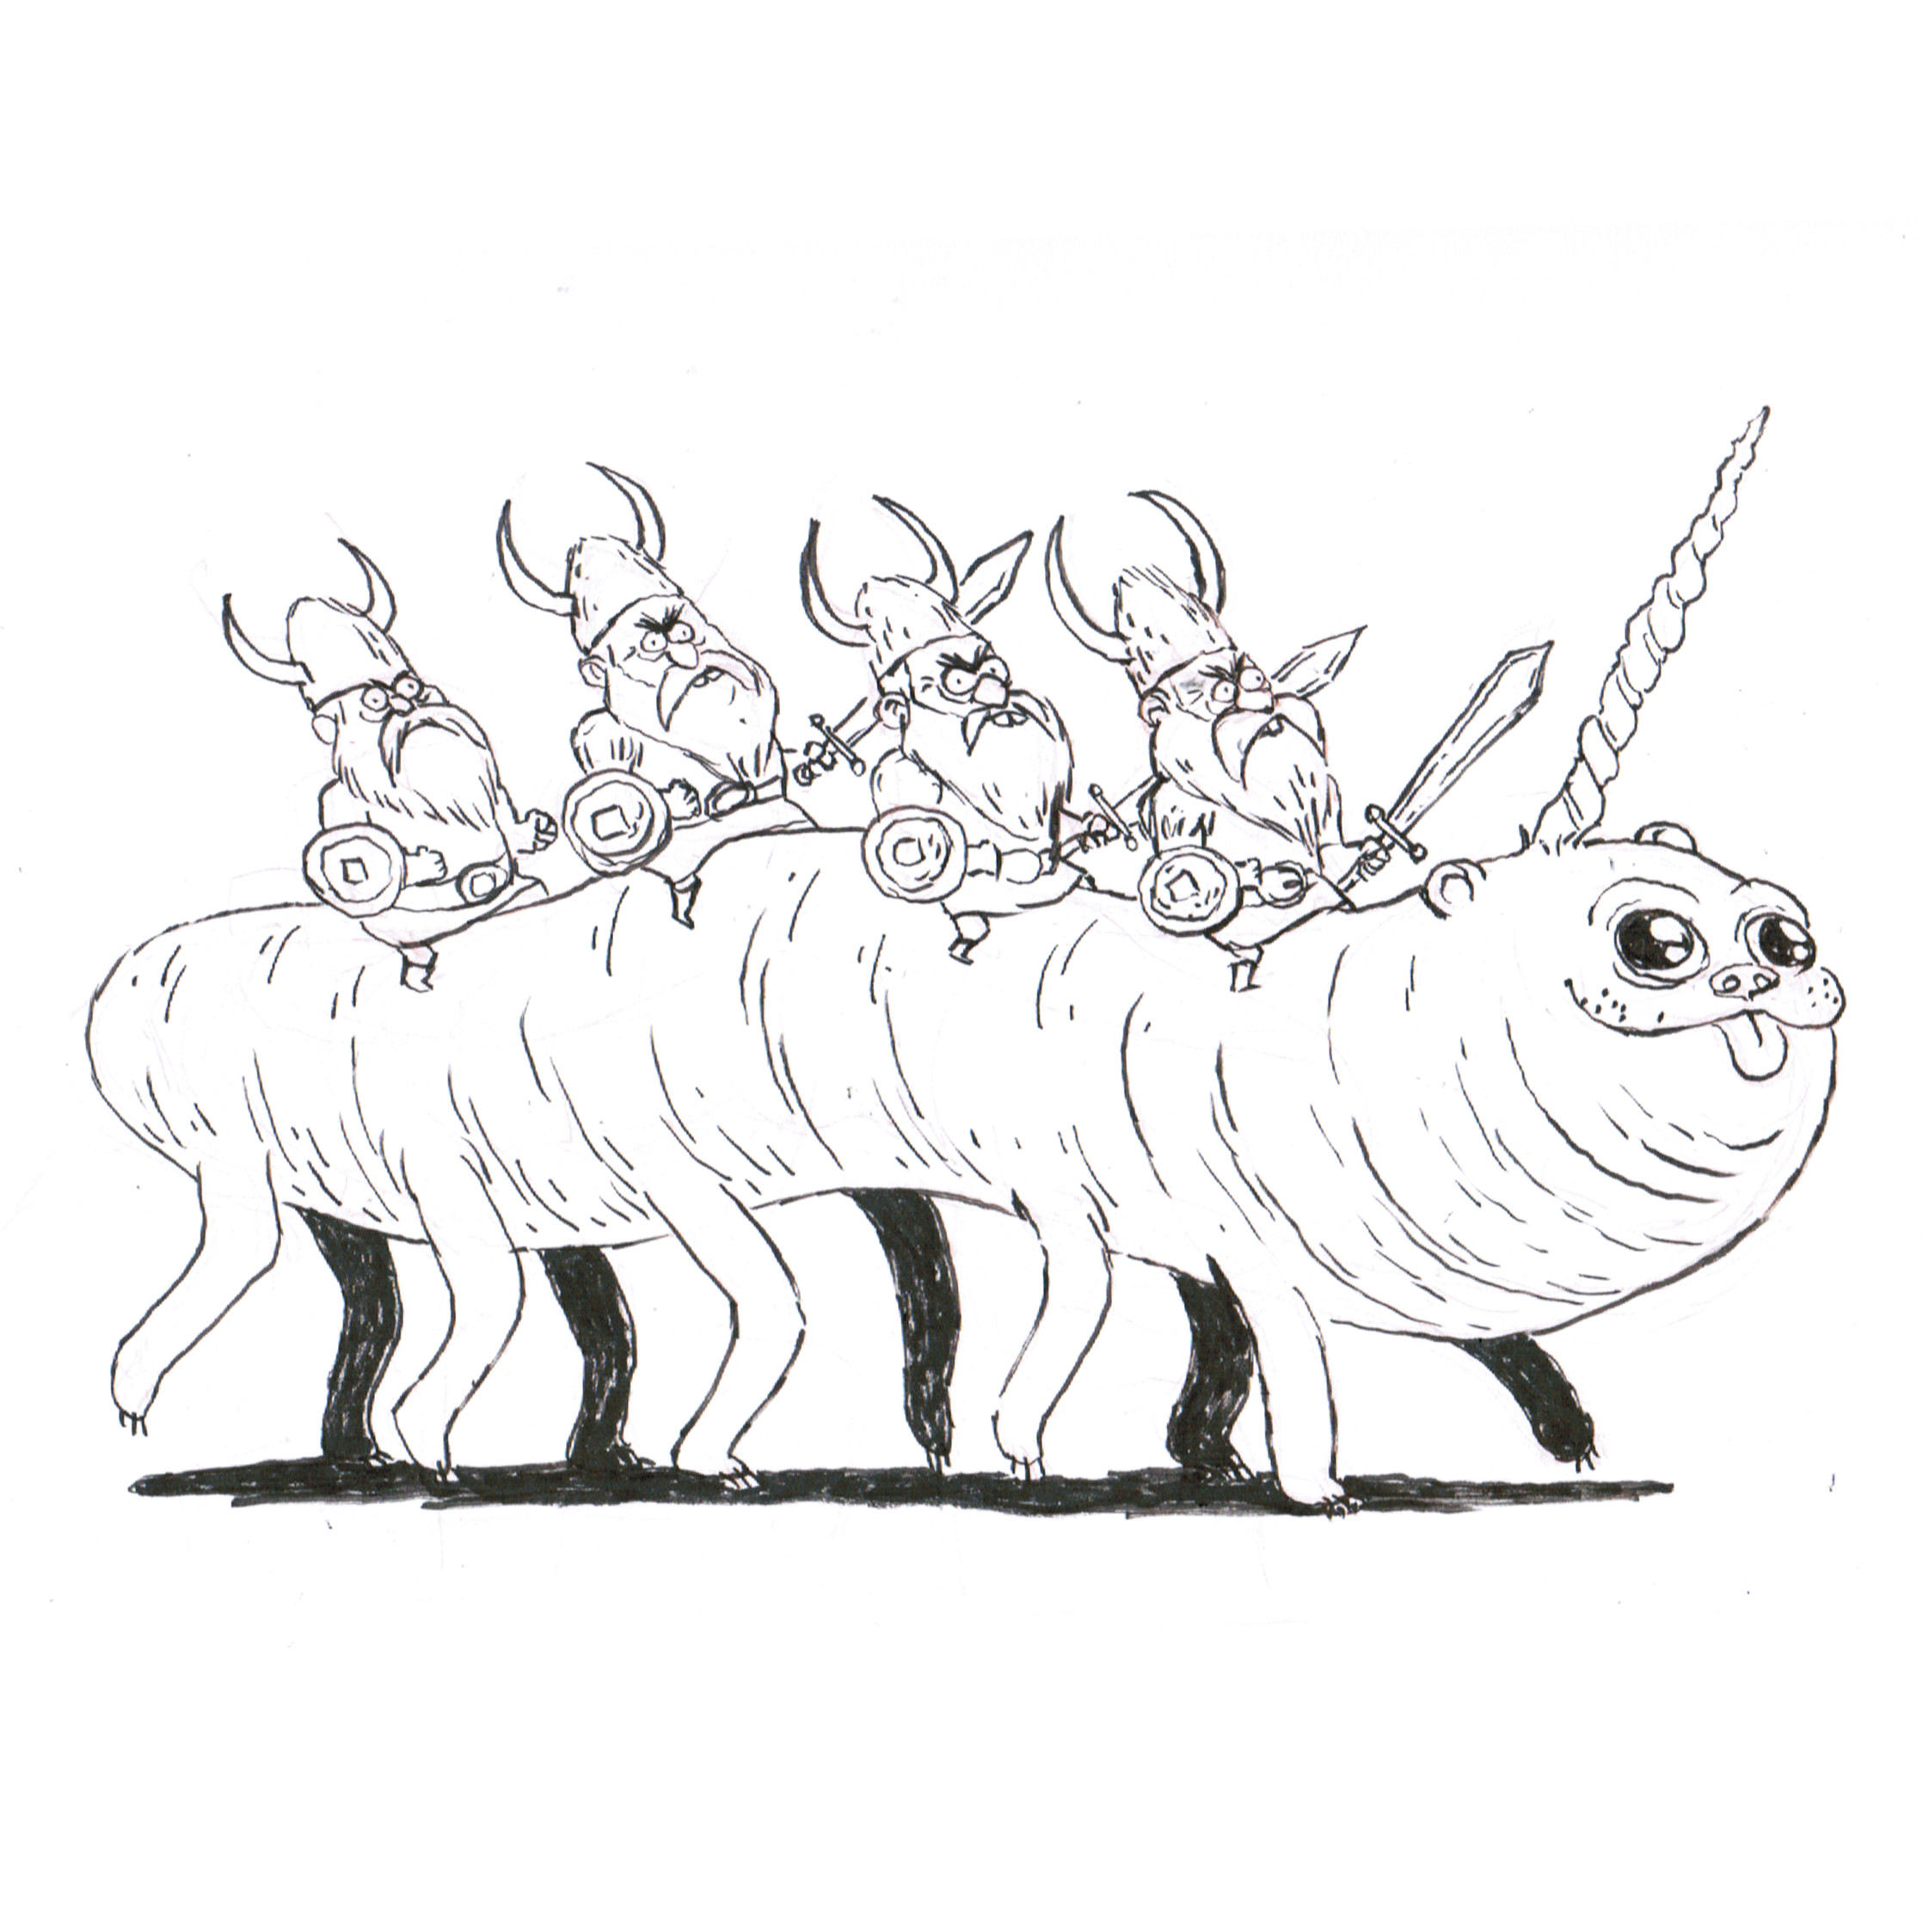 Some weird dudes riding a unicorn type thing. 
#dailydoodle #weird #unicorn